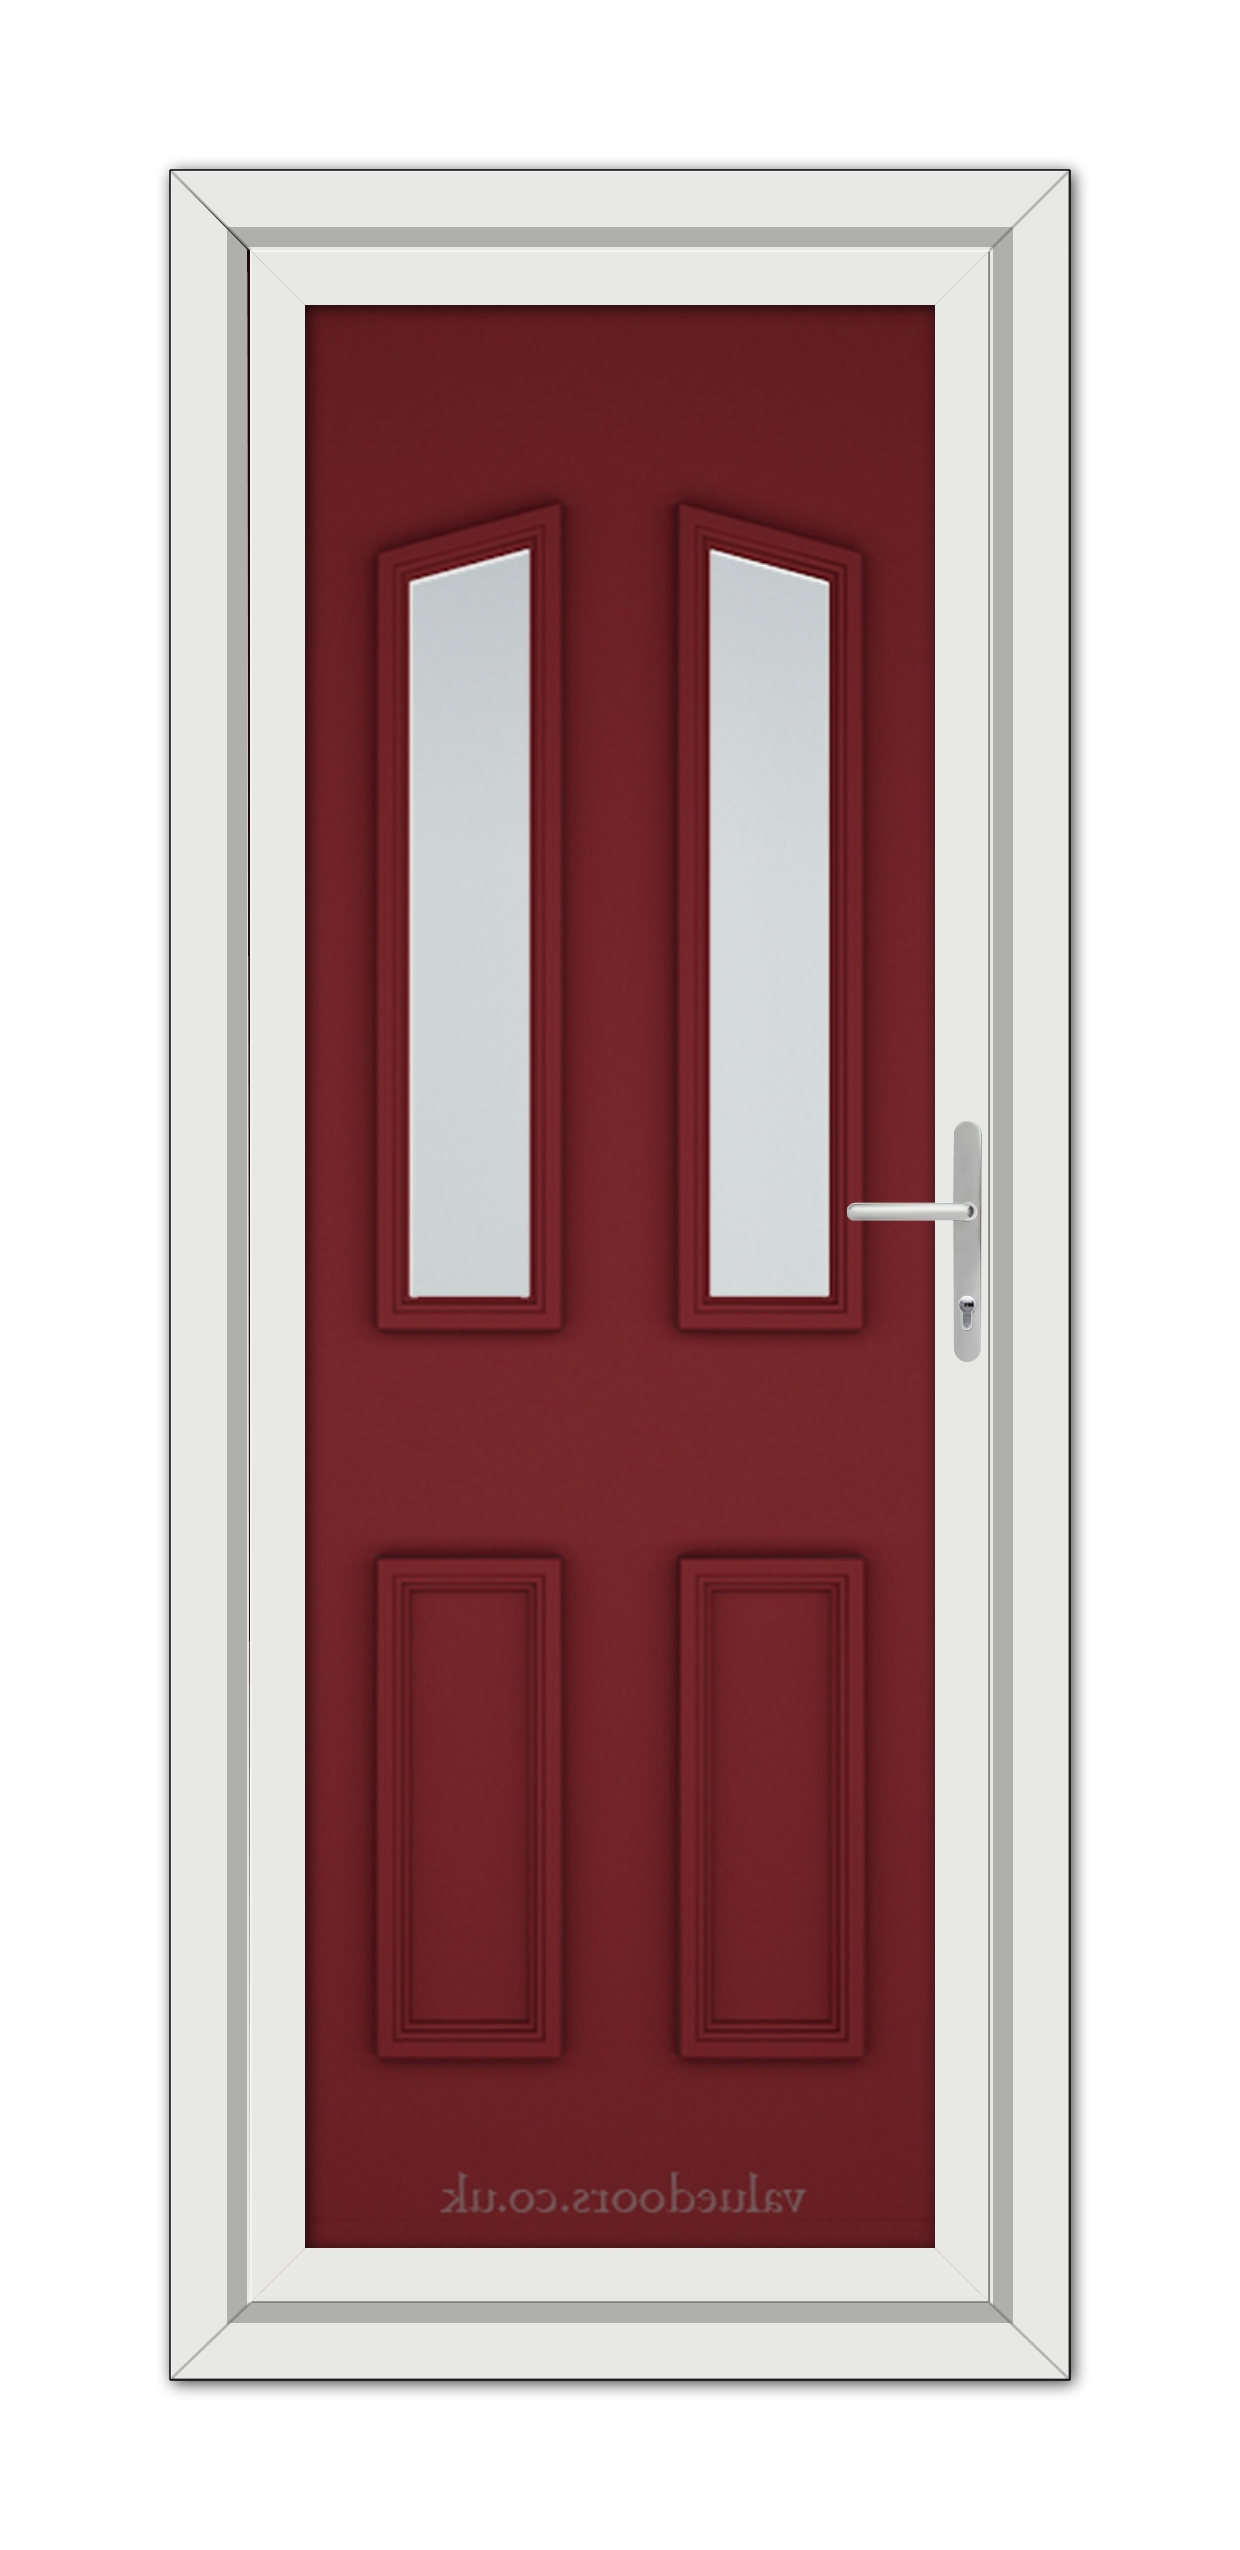 A modern Red Kensington uPVC Door with two vertical glass panels and a white frame, featuring a sleek silver handle on the right.